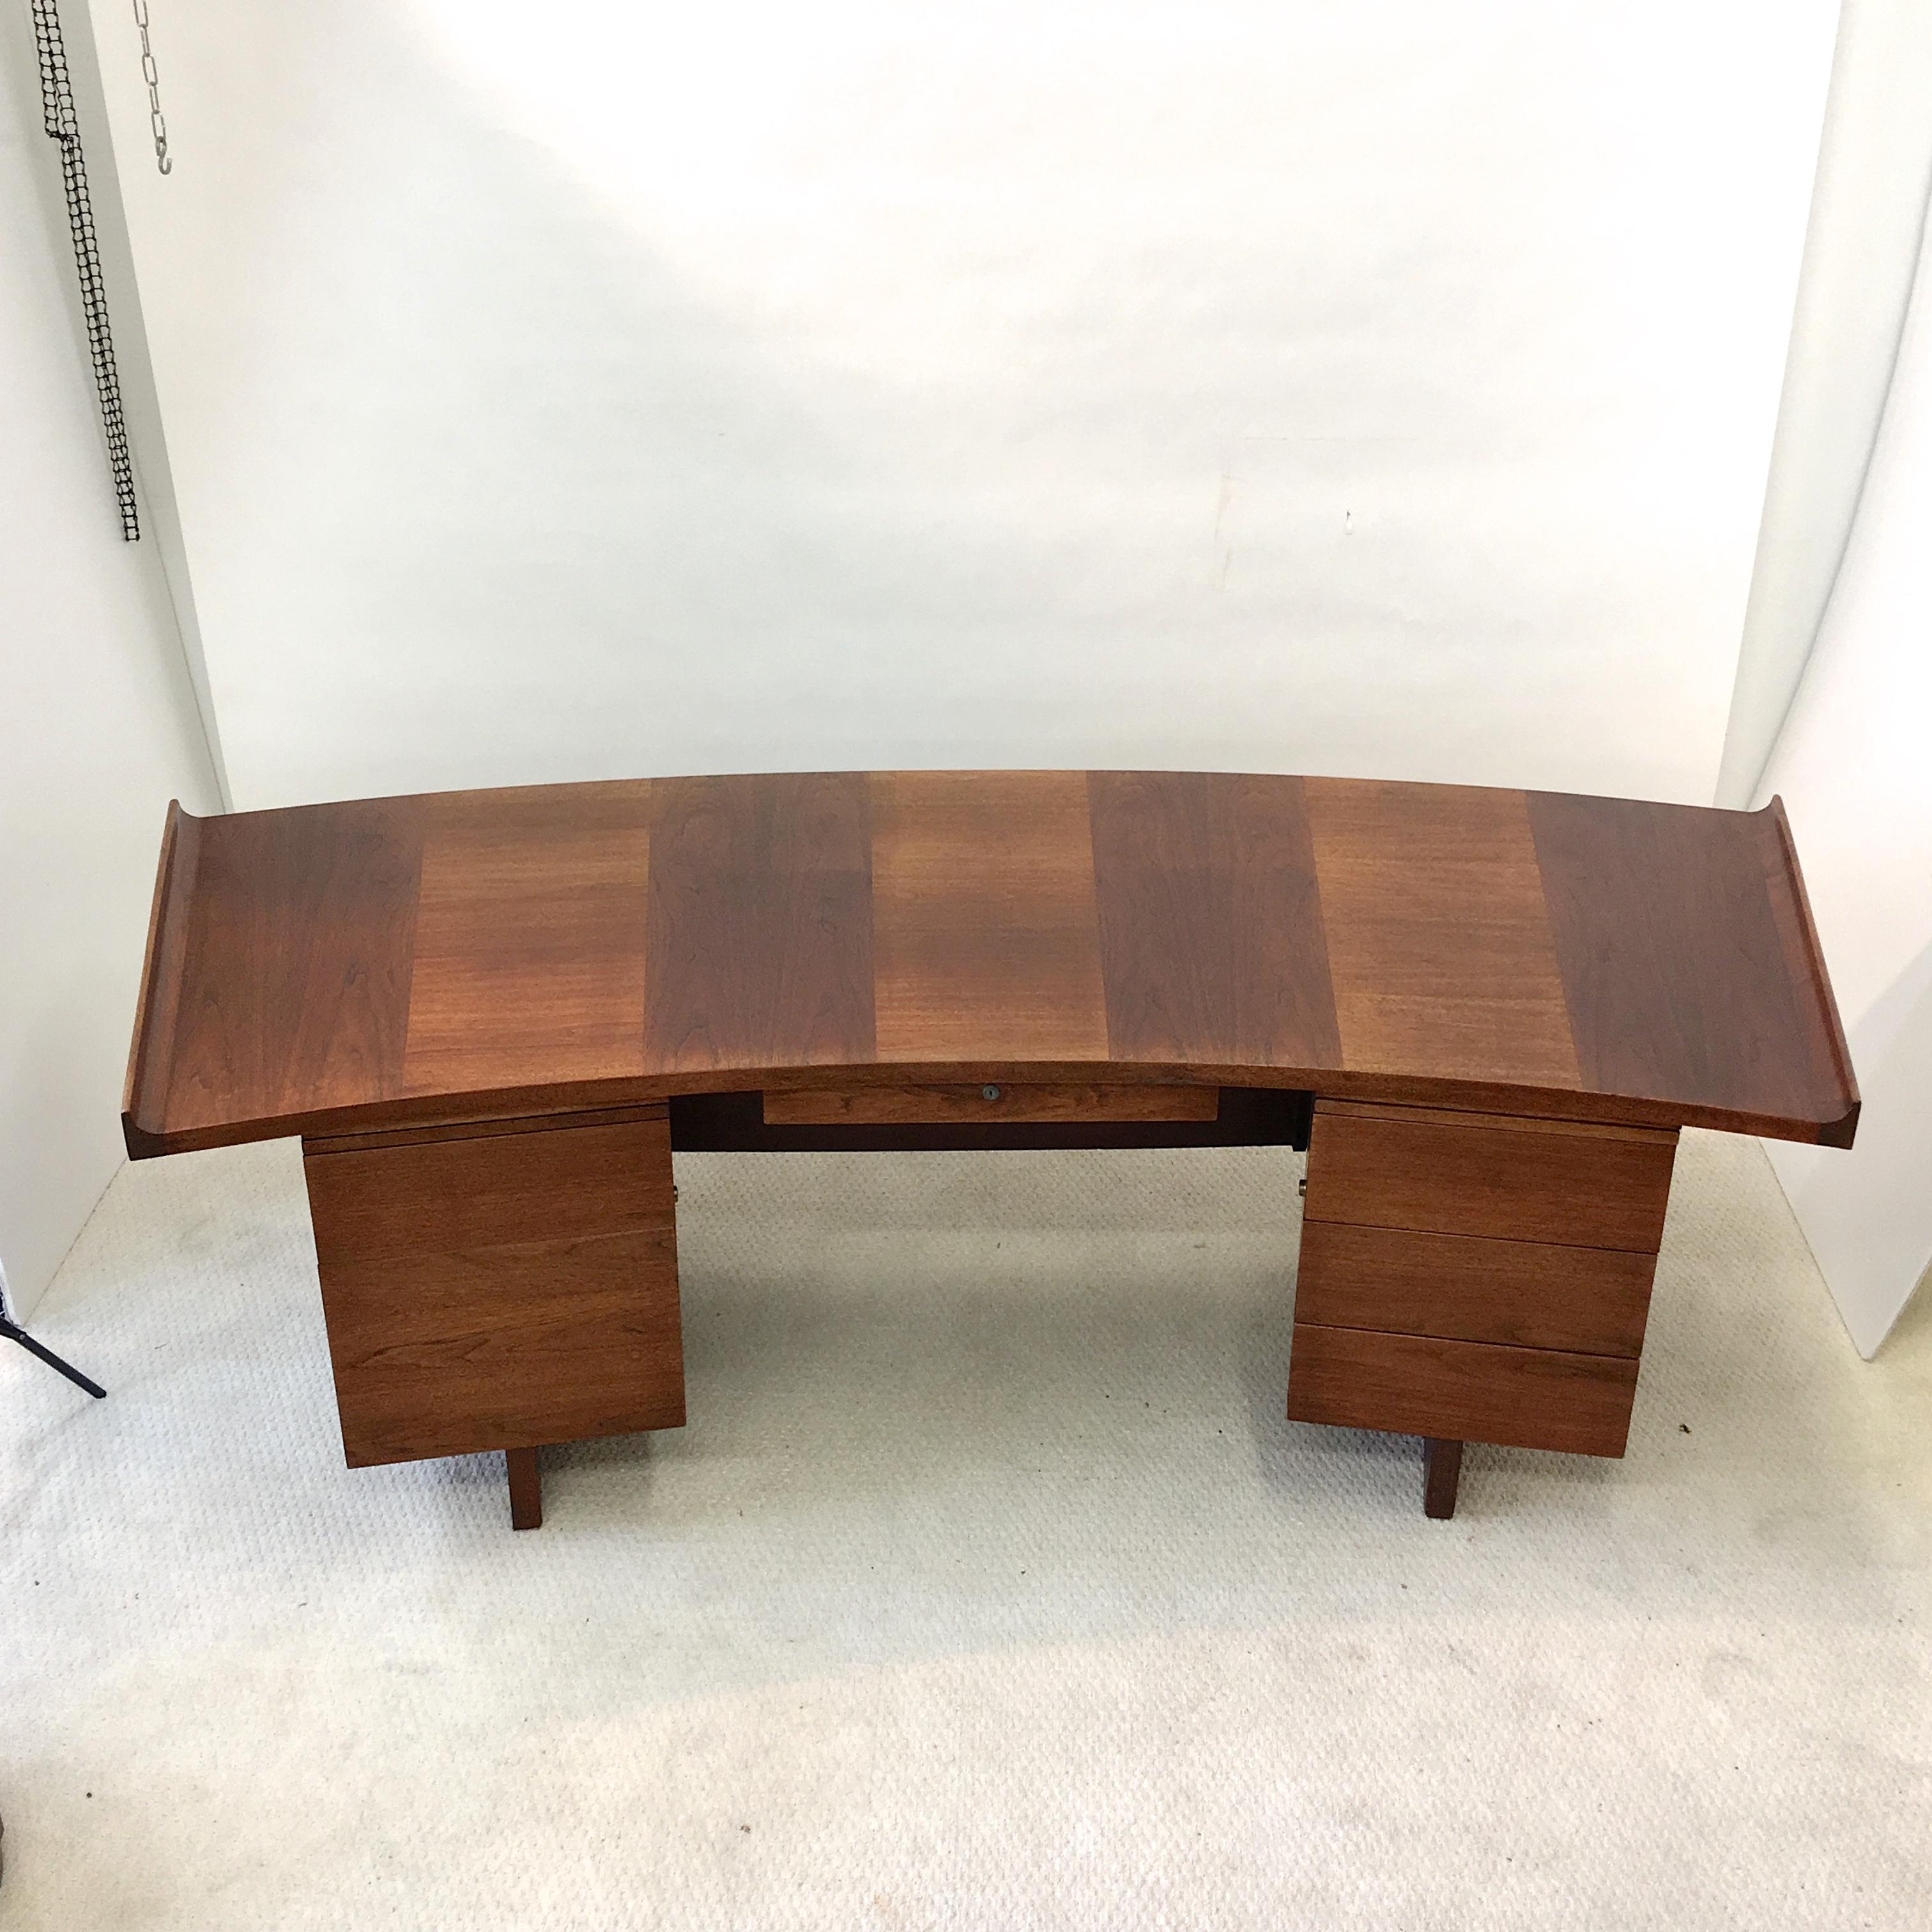 Monumental curved top executive desk in walnut by Harvey Probber.
This is the largest version of Probber's curved top desk made. 92